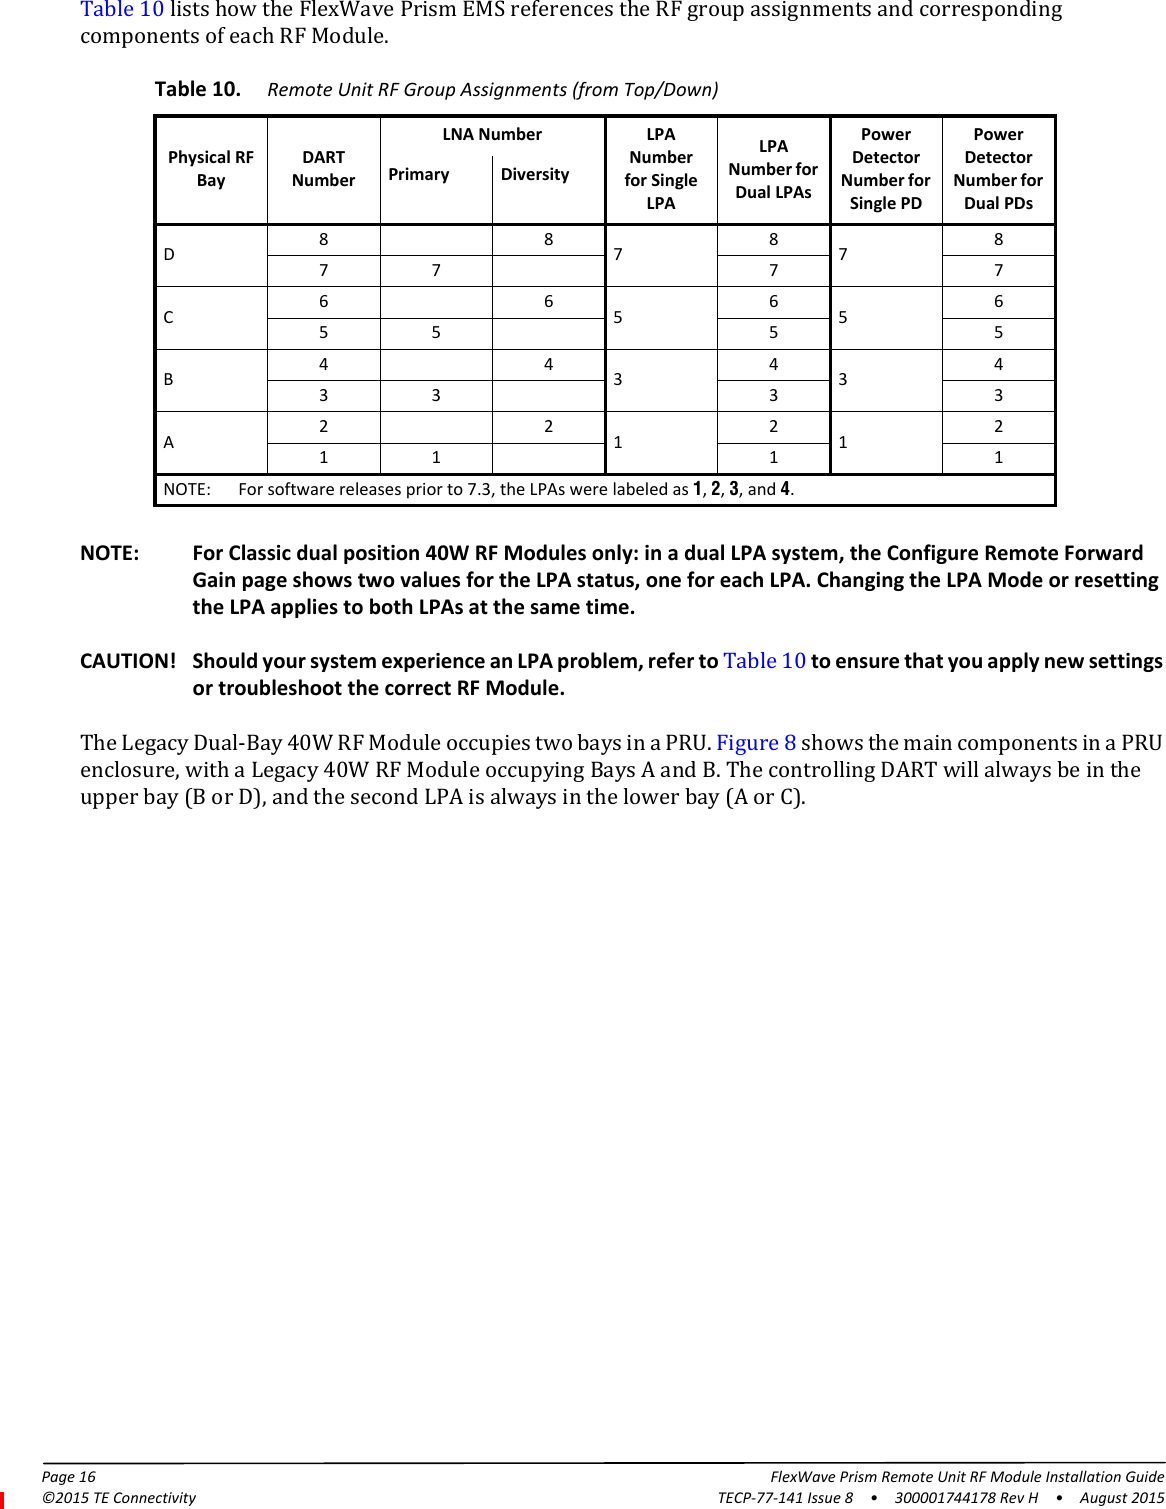 Page 16 FlexWave Prism Remote Unit RF Module Installation Guide©2015 TE Connectivity TECP-77-141 Issue 8  •  300001744178 Rev H  •  August 2015Table 10 lists how the FlexWave Prism EMS references the RF group assignments and corresponding components of each RF Module.Table 10. Remote Unit RF Group Assignments (from Top/Down)Physical RF BayDART NumberLNA Number LPA Numberfor Single LPALPA Number for Dual LPAsPower Detector Number for Single PDPower Detector Number for Dual PDsPrimary DiversityD8 8 78787 7 7 7C6 6 56565 5 5 5B4 4 34343 3 3 3A2 2 12121 1 1 1NOTE: For software releases prior to 7.3, the LPAs were labeled as 1, 2, 3, and 4.NOTE: For Classic dual position 40W RF Modules only: in a dual LPA system, the Configure Remote Forward Gain page shows two values for the LPA status, one for each LPA. Changing the LPA Mode or resetting the LPA applies to both LPAs at the same time.CAUTION! Should your system experience an LPA problem, refer to Table 10 to ensure that you apply new settings or troubleshoot the correct RF Module.The Legacy Dual-Bay 40W RF Module occupies two bays in a PRU. Figure 8 shows the main components in a PRU enclosure, with a Legacy 40W RF Module occupying Bays A and B. The controlling DART will always be in the upper bay (B or D), and the second LPA is always in the lower bay (A or C).